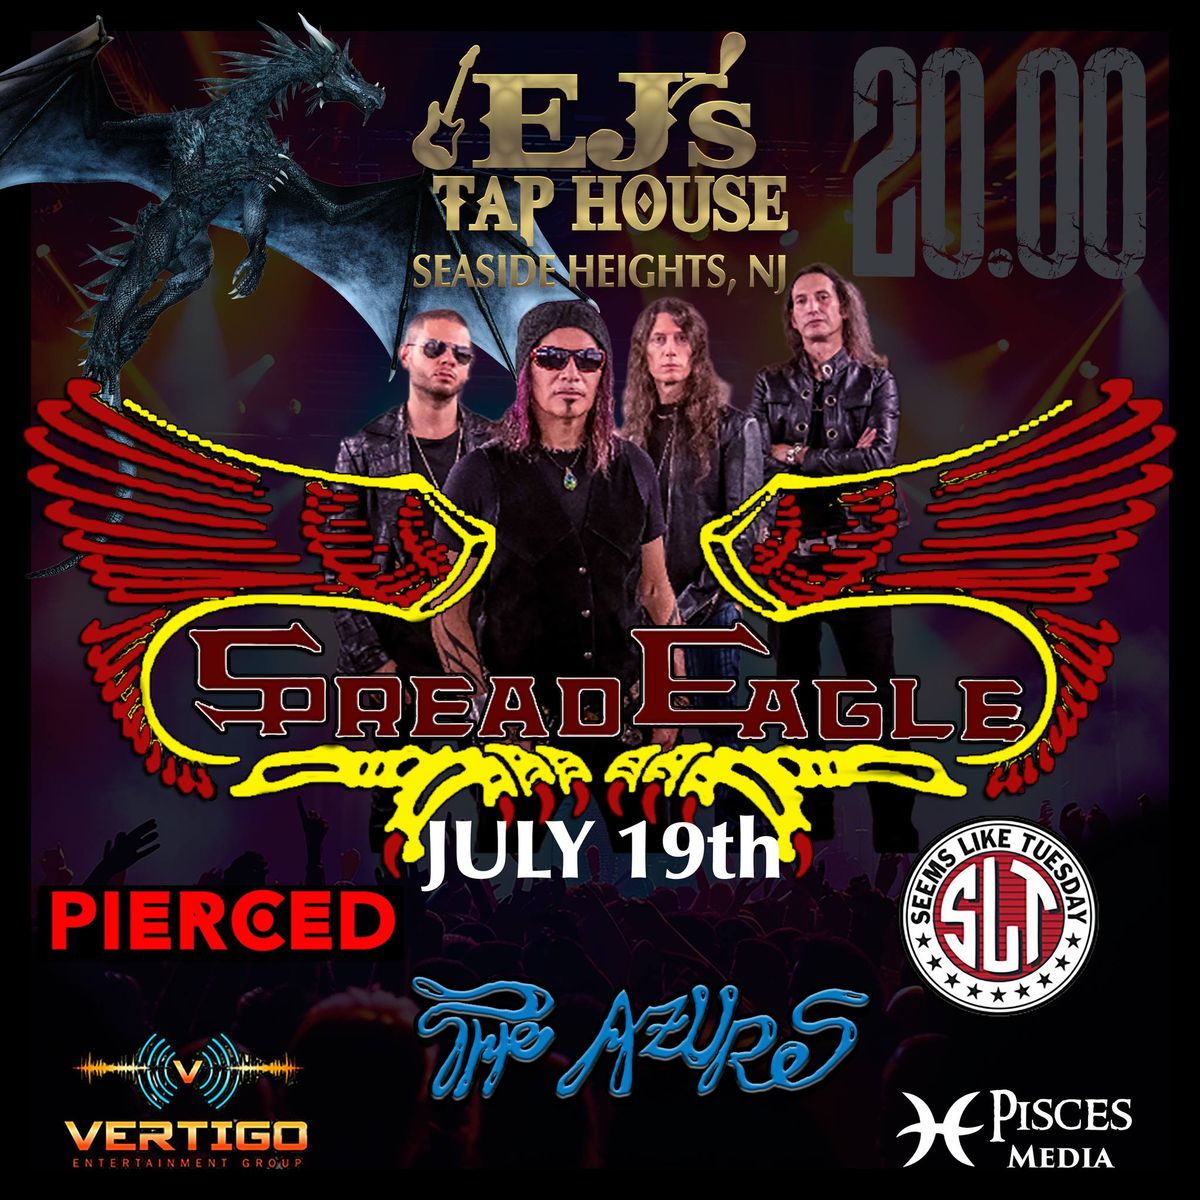 The Azures return to EJ's Tap House with Spread Eagle, Pierced & more!